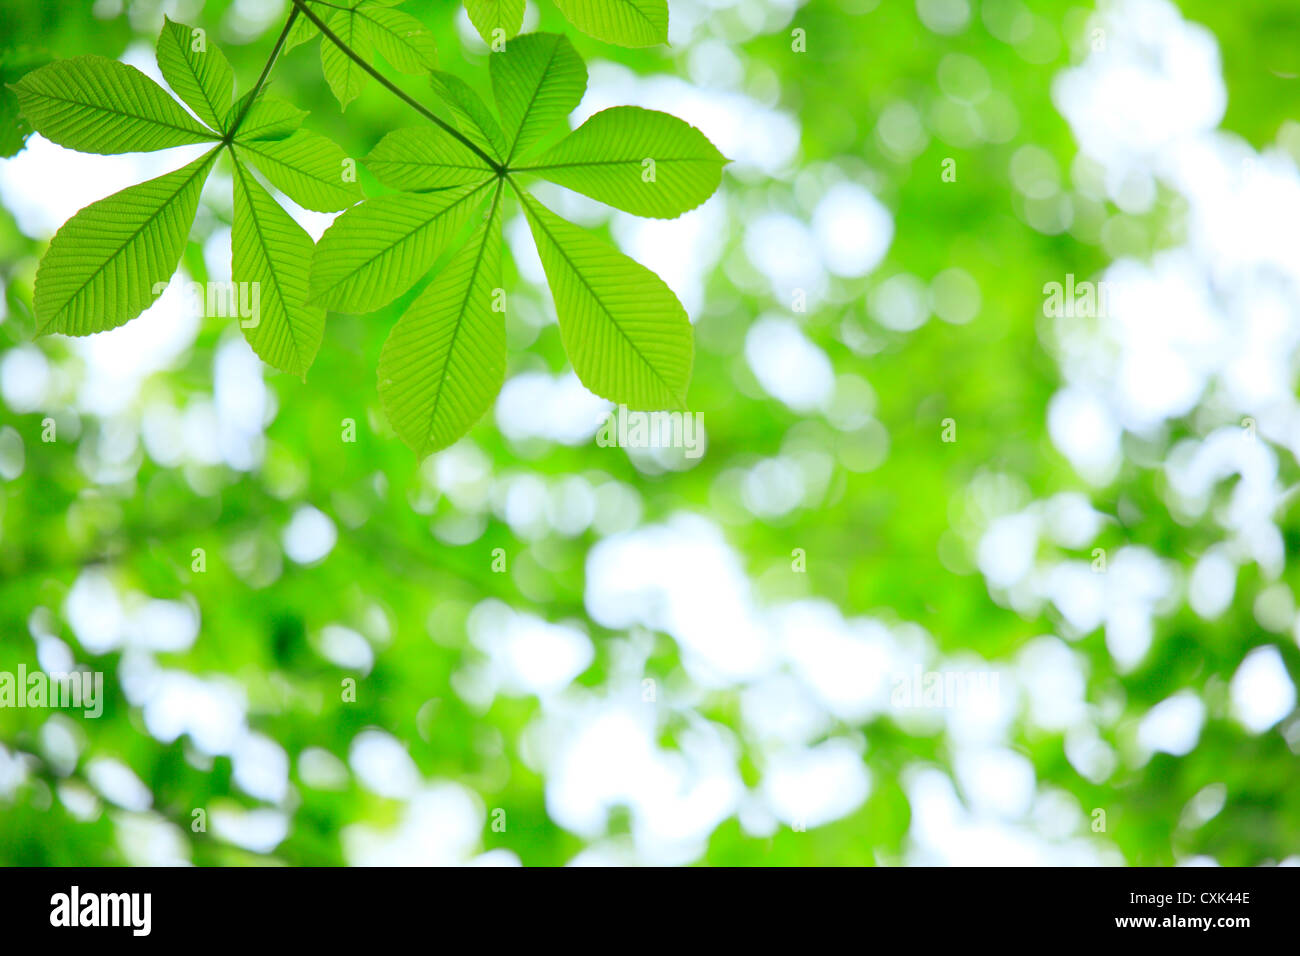 Aesculus young leaves Stock Photo